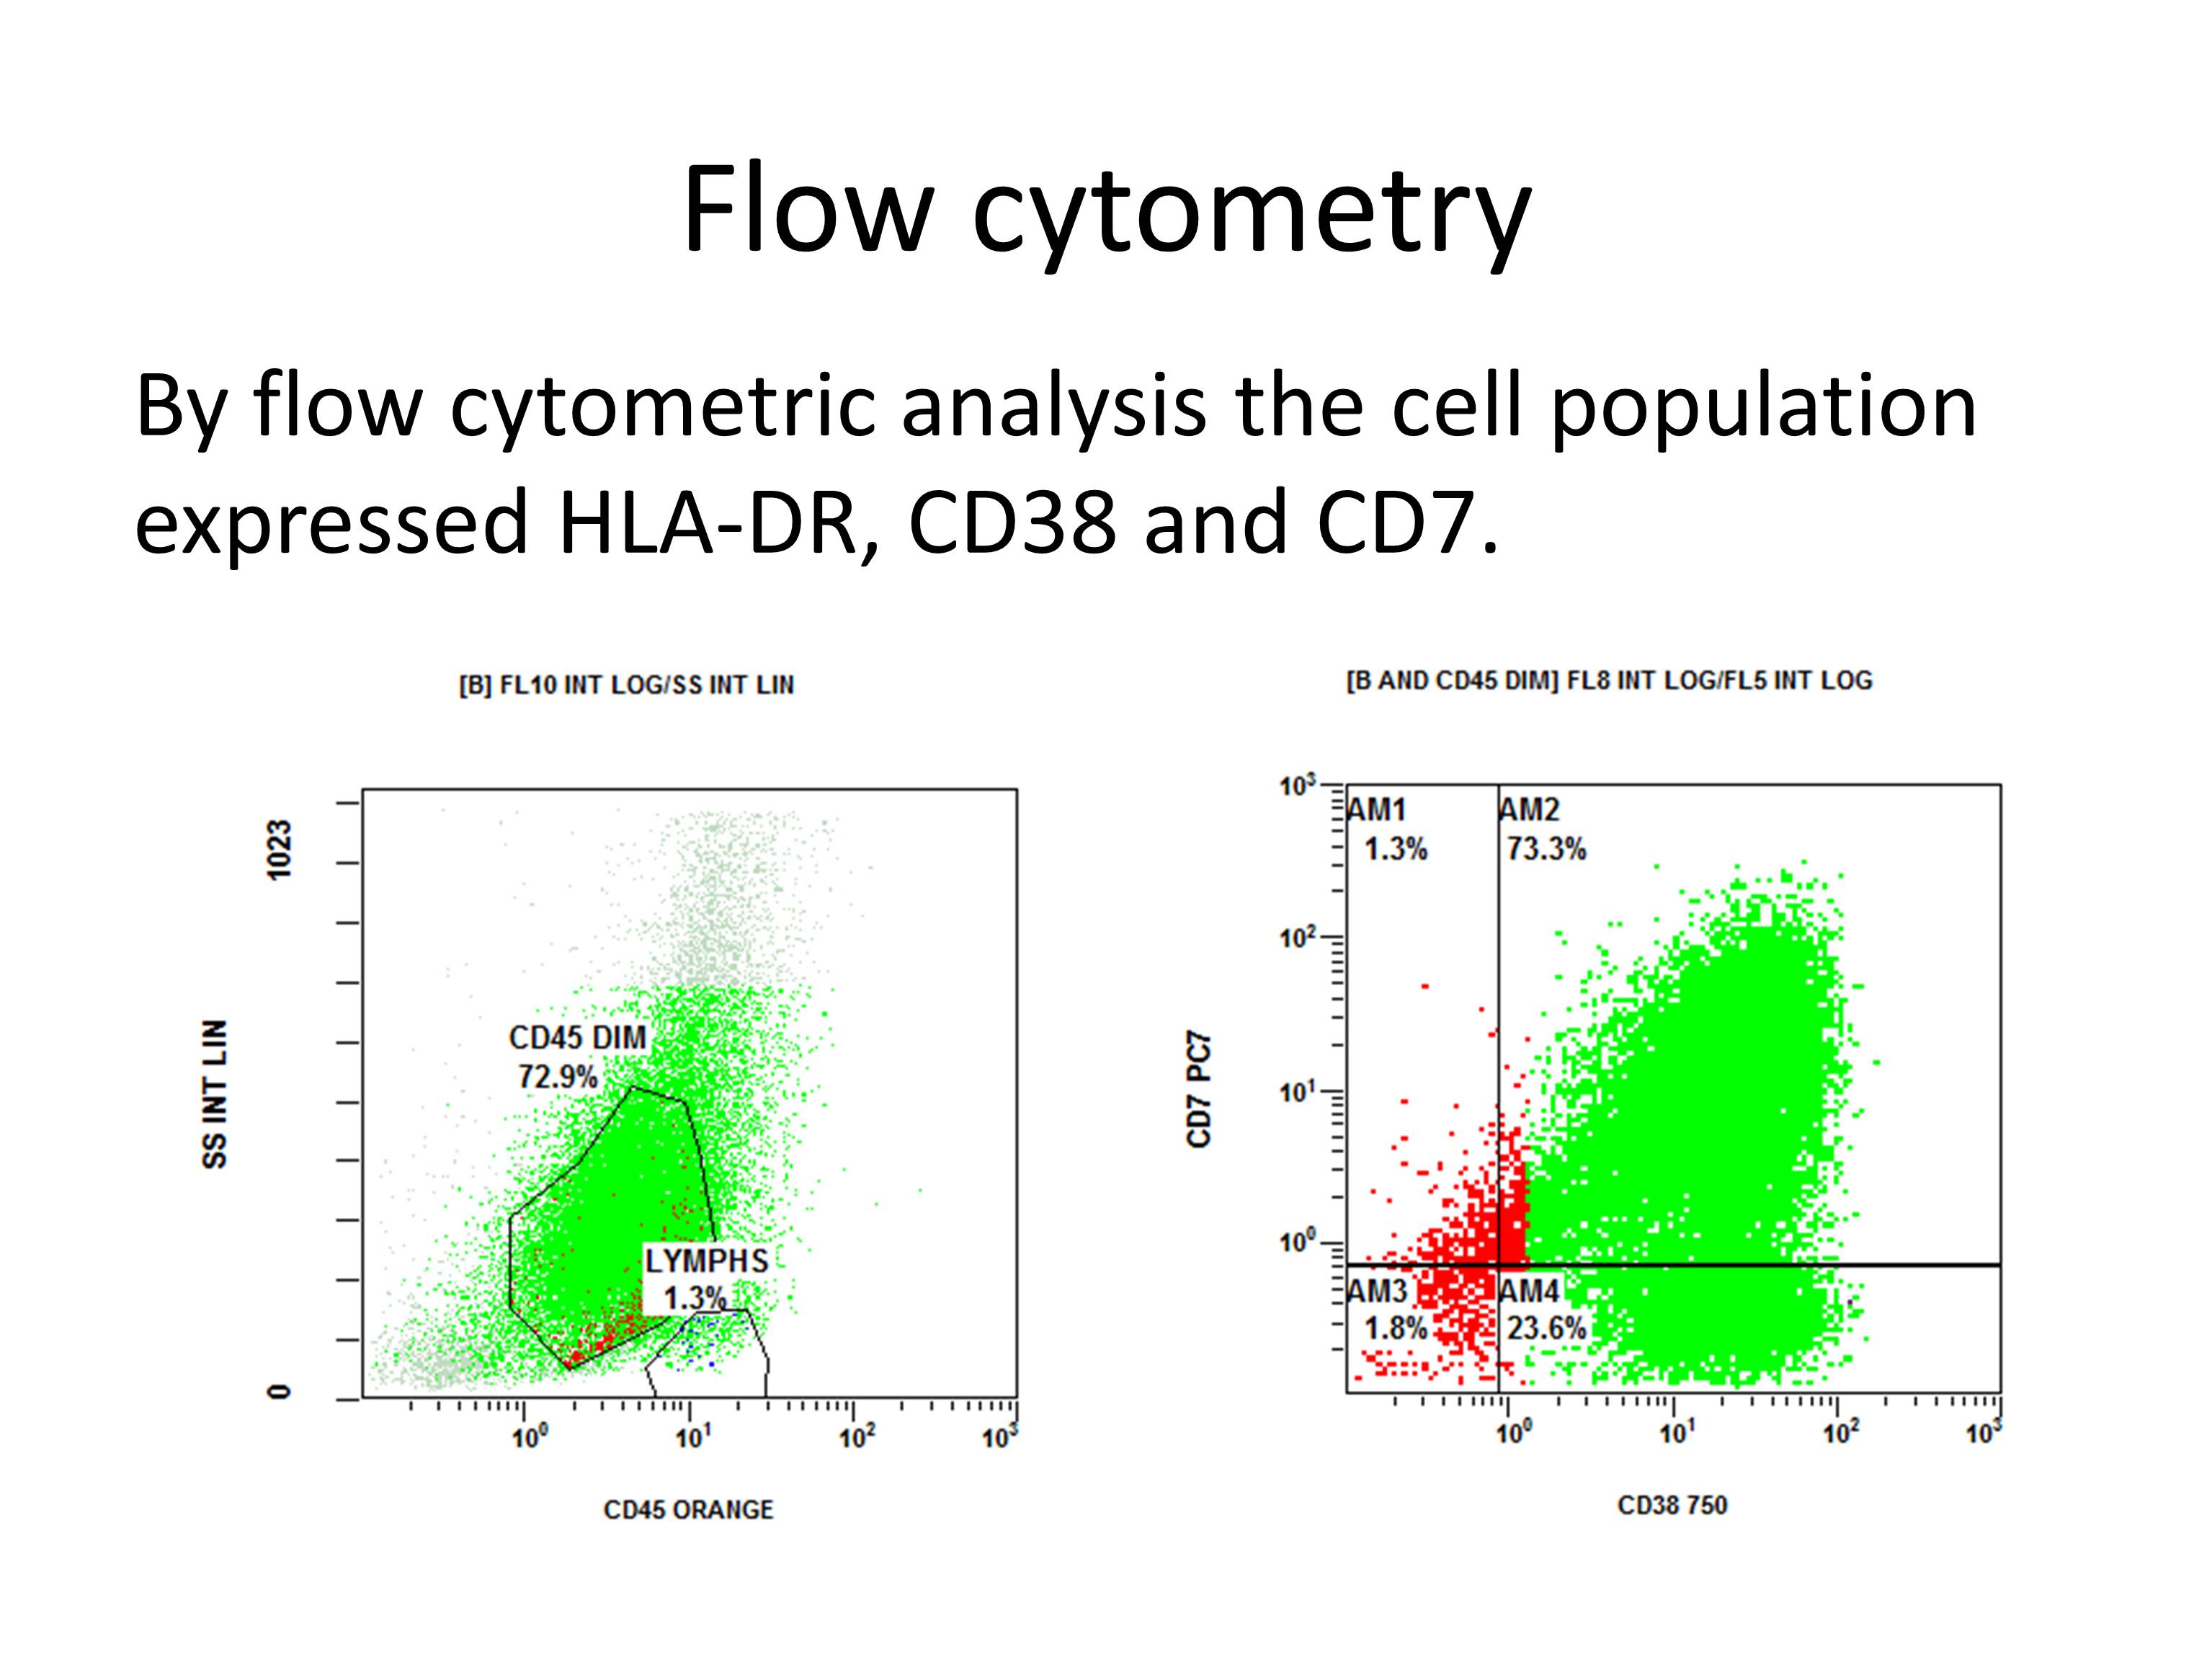 Flo Cytometry analysis />
			             </div>
			        	    <h4>Primary effusion lymphoma (formerly body cavity lymphoma) is one of the least common of acquired immune deficiency syndrome (AIDS) related lymphomas. It accounts for about 4% of all HIV associated non-Hodgkin's lymphomas.(1) The vast majority occur in HIV infected patients, however, this can occur in the absence of infection.(2) The malignant cells of primary effusion lymphoma (PEL) are monoclonal B cells that express cell surface CD38 and contain genomic material from human herpesvirus-8 (100%) and, in many cases, Epstein-Barr virus (80%). It originates on serosal surfaces, including pleura, pericardium and peritoneum.(3) Clinically manifestations depend upon extent and distribution of disease. Symptomatic patients present with dyspnea from pleural/pericardial effusions, abdominal distention, or joint swelling, all related to fluid accumulation. Imaging studies normally reveal evidence of local effusions consistent with accumulation fluid but no detectable mass lesion. However, it may rarely present as an HHV-8 positive solid tumor which predominantly occur in the gastrointestinal tract. Immunohistochemistry is positive for HHV8 (essential for diagnosis), plasma cell associated markers (CD138, VS38c, CD38 , EMA, IRF-4/MUM 1), CD30, CD45; variable for cytoplasmic Ig λ light chain and negative for pan B cel markers (CD19, CD20, CD79 and Pax-5). While present in this case, CD7 positivity is not typical of this disease. In situ EBER (+) is seen in 80% of the cases and flow cytometry is positive for CD45/LCA.  
                            </h4>
                           <h4>Primary effusion lymphoma has  also been associated with Castleman disease, a lymphoproliferative disorder  that causes  excessive cytokine release secondary to the expression of the HHV-8 cytokine, vIL-6. This can progress to plasmablastic lymphoma and can also be associated with other plasma cell dyscrasias, Kaposi sarcoma and primary effusion lymphoma (4) as in this case.  
                            </h4>
                            
                        

			             </div>
                    
                        </div>
						
					    
					    
					    
					    
					    <div class=